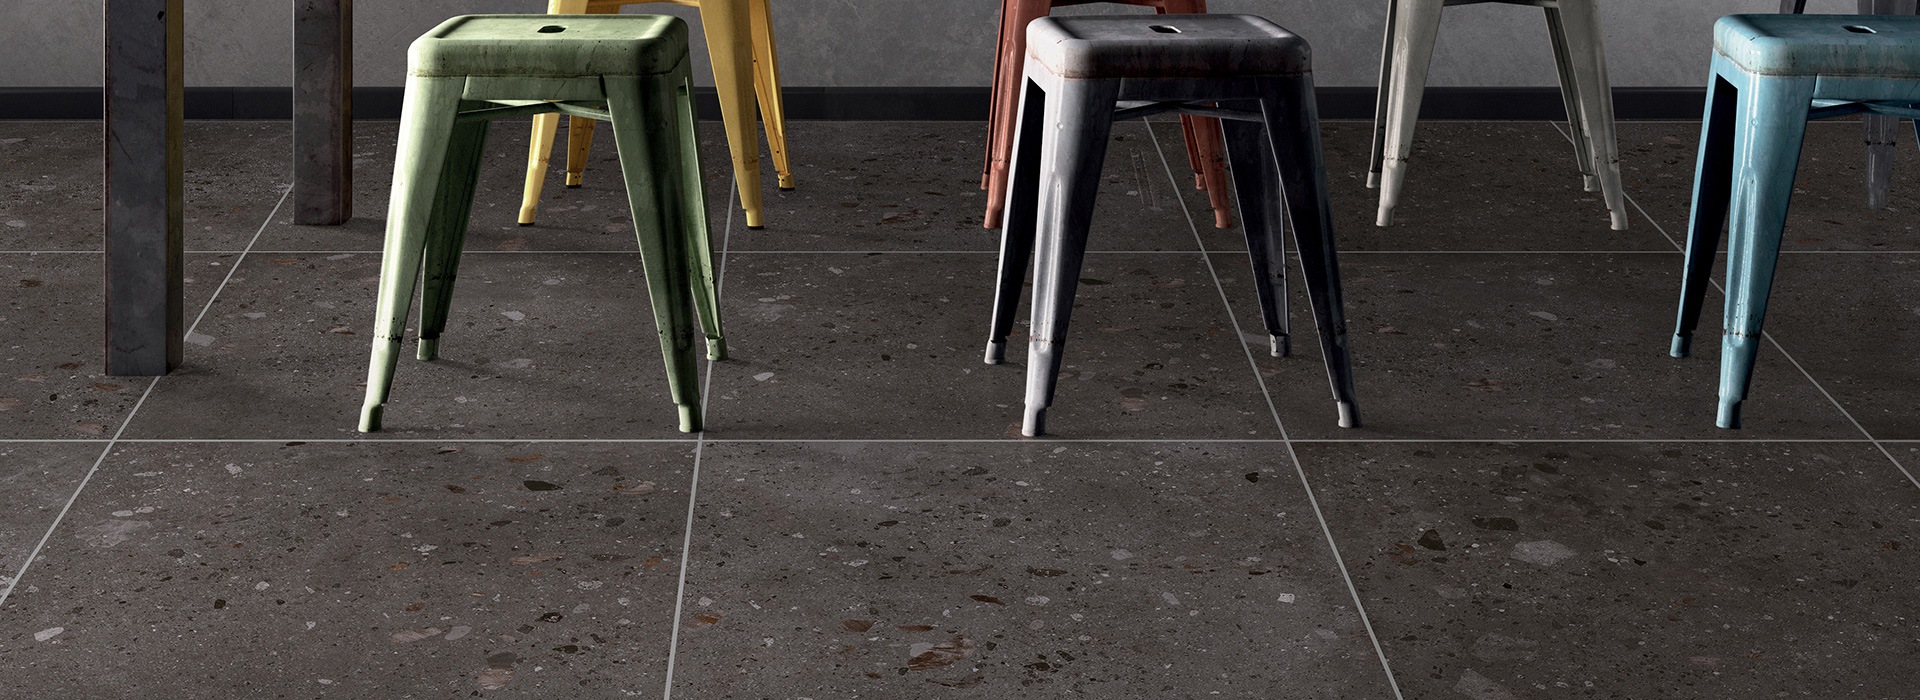 Italtile’s New Matrix By Gryphon Is Both On-Trend And Eco-Chic